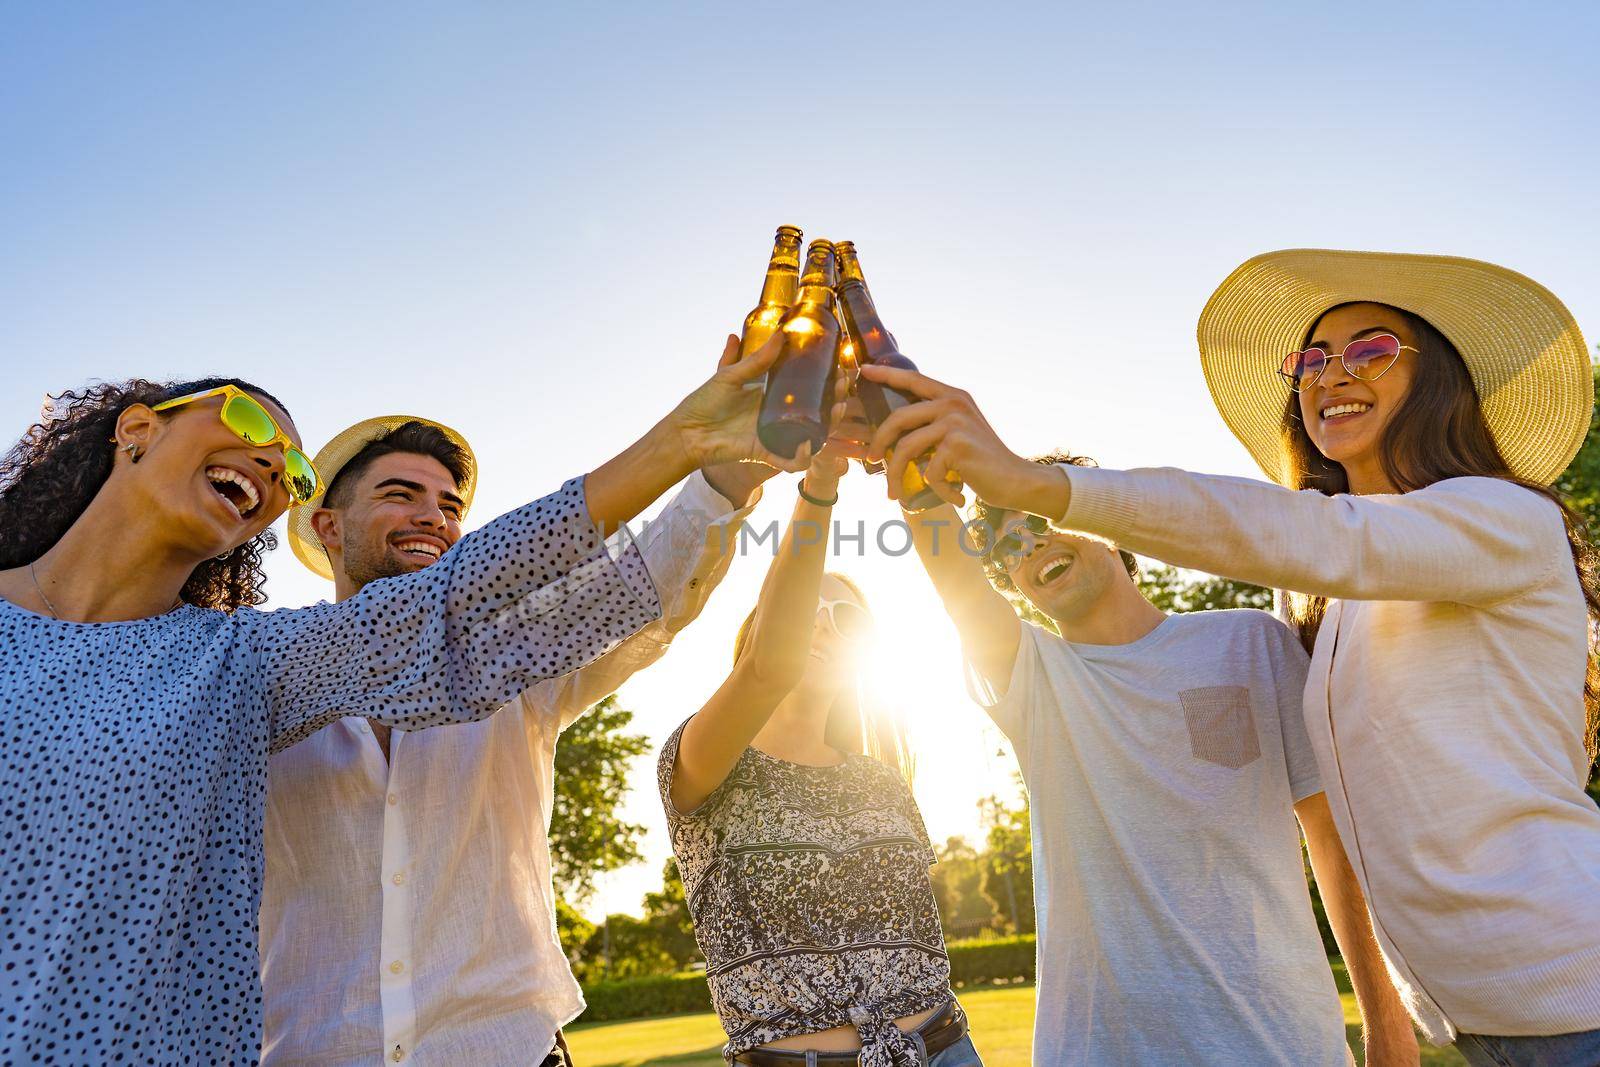 Group of young hipster friends celebrating outdoor drinking beer and toasting with bottle in front of sun setting. Happy beautiful millennials having fun with alcohol outdoor in a park at dusk by robbyfontanesi